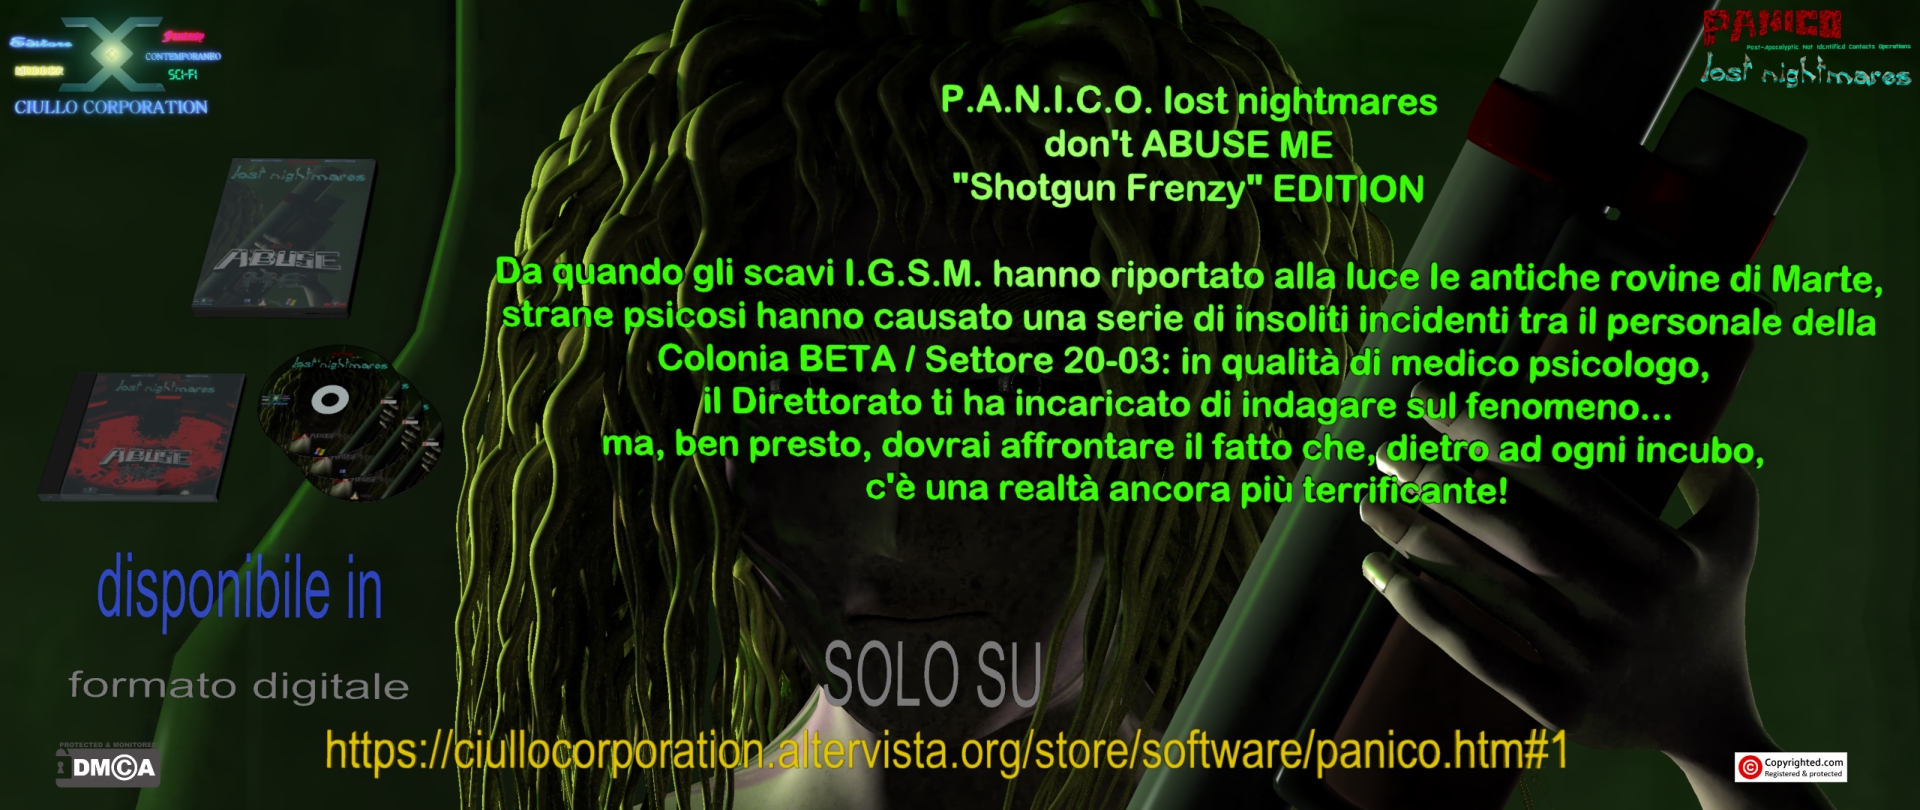 P.A.N.I.C.O. lost nightmares. don't ABUSE ME (WINDOWS)